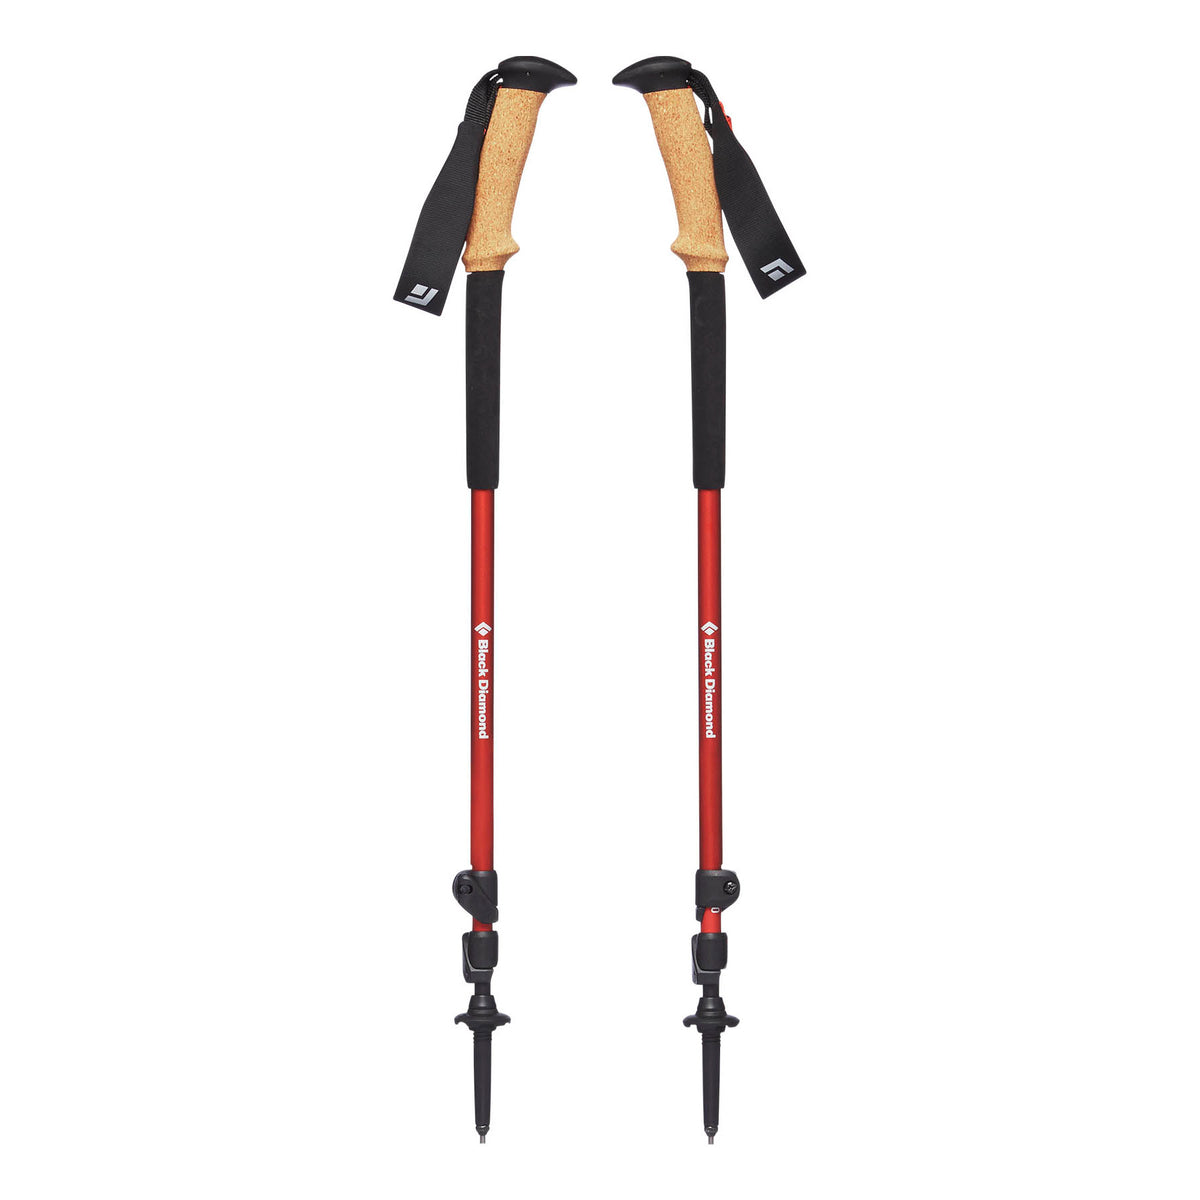 Pair of Black Diamond Trail Ergo Cork poles, shown collapsed with angled cork grips